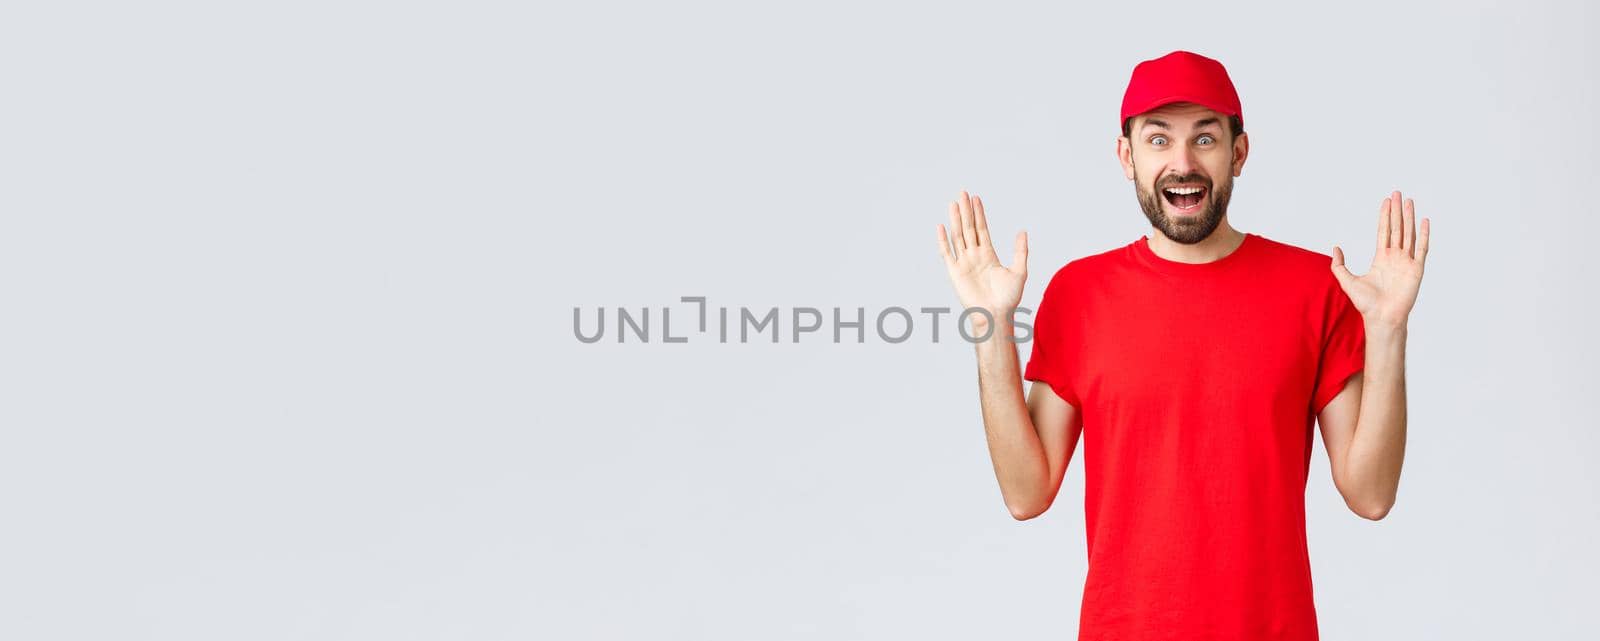 Online shopping, delivery during quarantine and takeaway concept. Happy cheerful courier in red t-shirt and cap, company uniform, hands up surprised and amused, standing grey background.